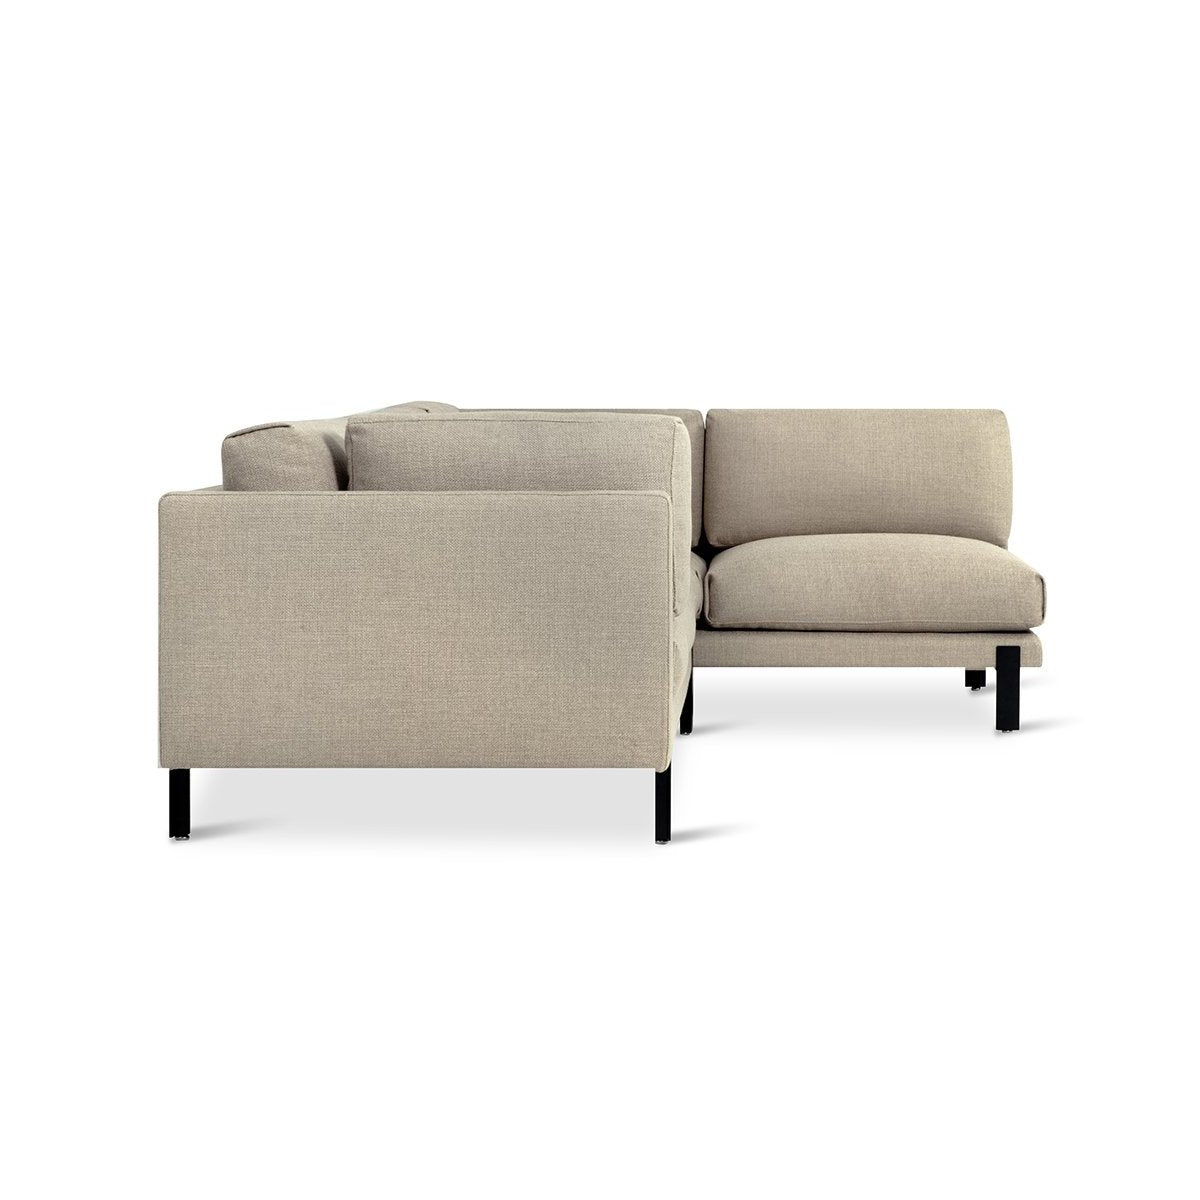 Load image into Gallery viewer, Silverlake Sectional Left Facing Sectional Sofa Gus*     Four Hands, Burke Decor, Mid Century Modern Furniture, Old Bones Furniture Company, Old Bones Co, Modern Mid Century, Designer Furniture, https://www.oldbonesco.com/
